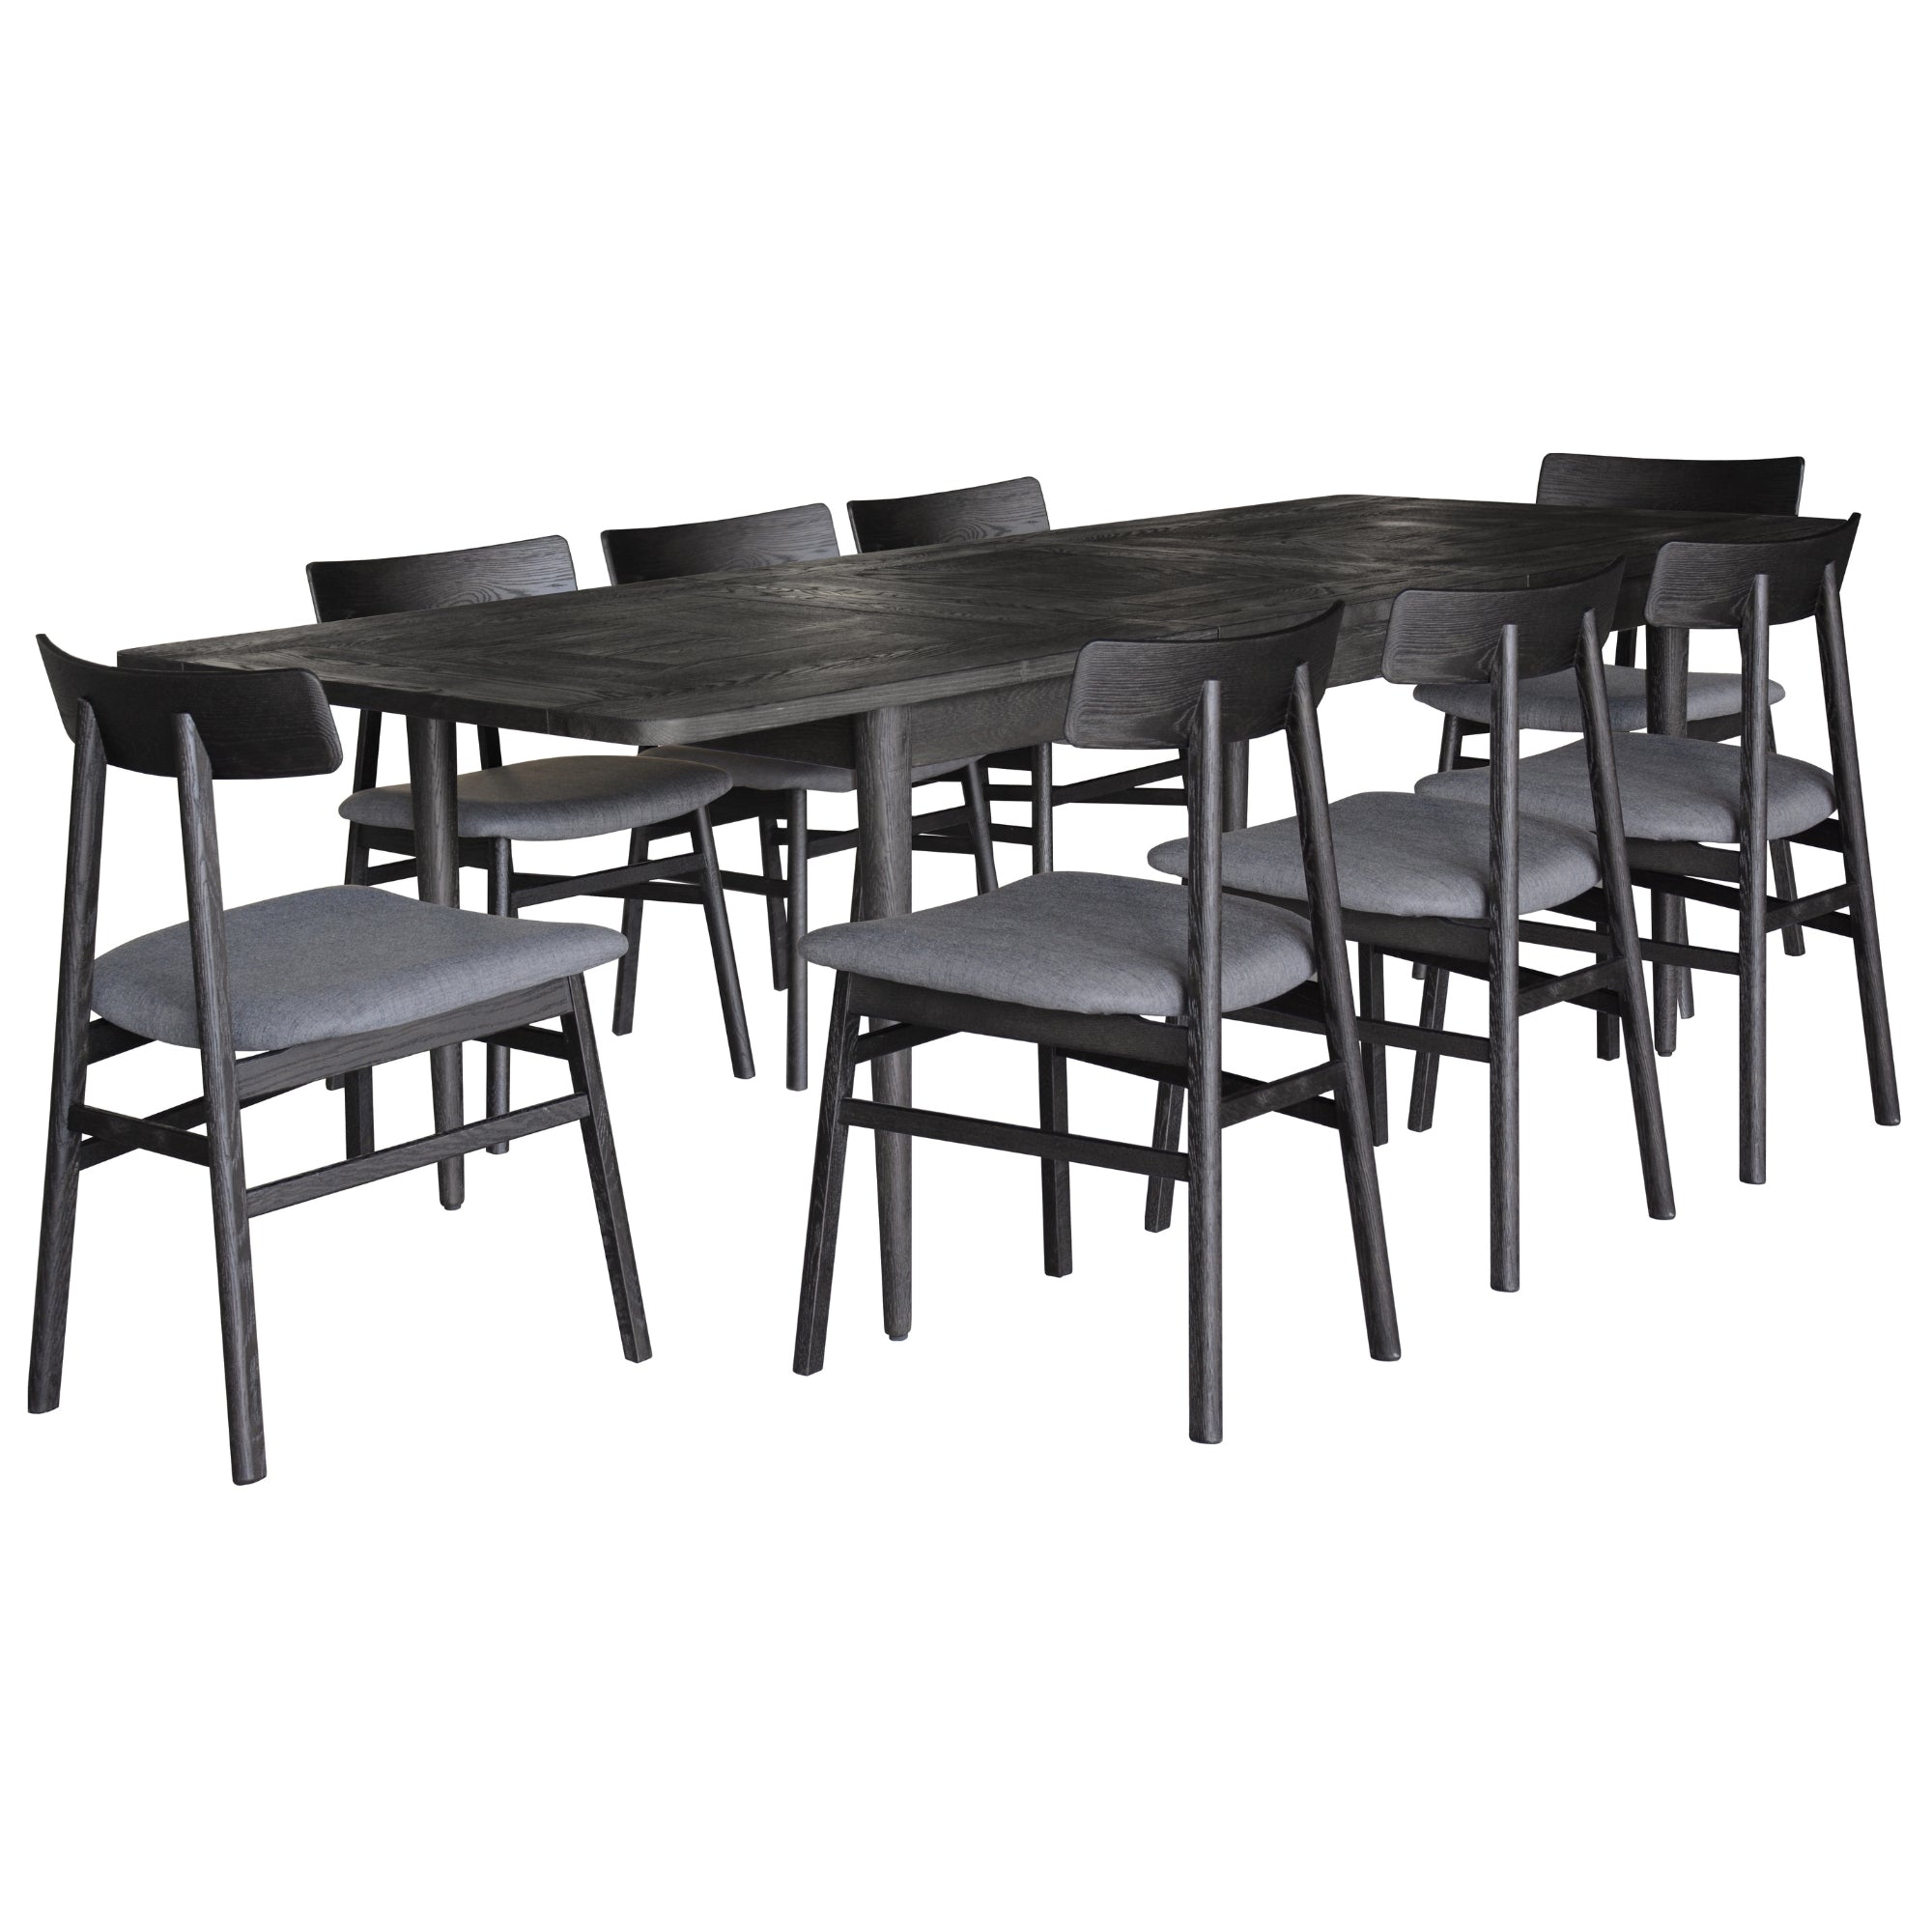 Claire 9pc Dining Set Table Extendable 170-230cm Oak Fabric Seat Chair - Black - SILBERSHELL